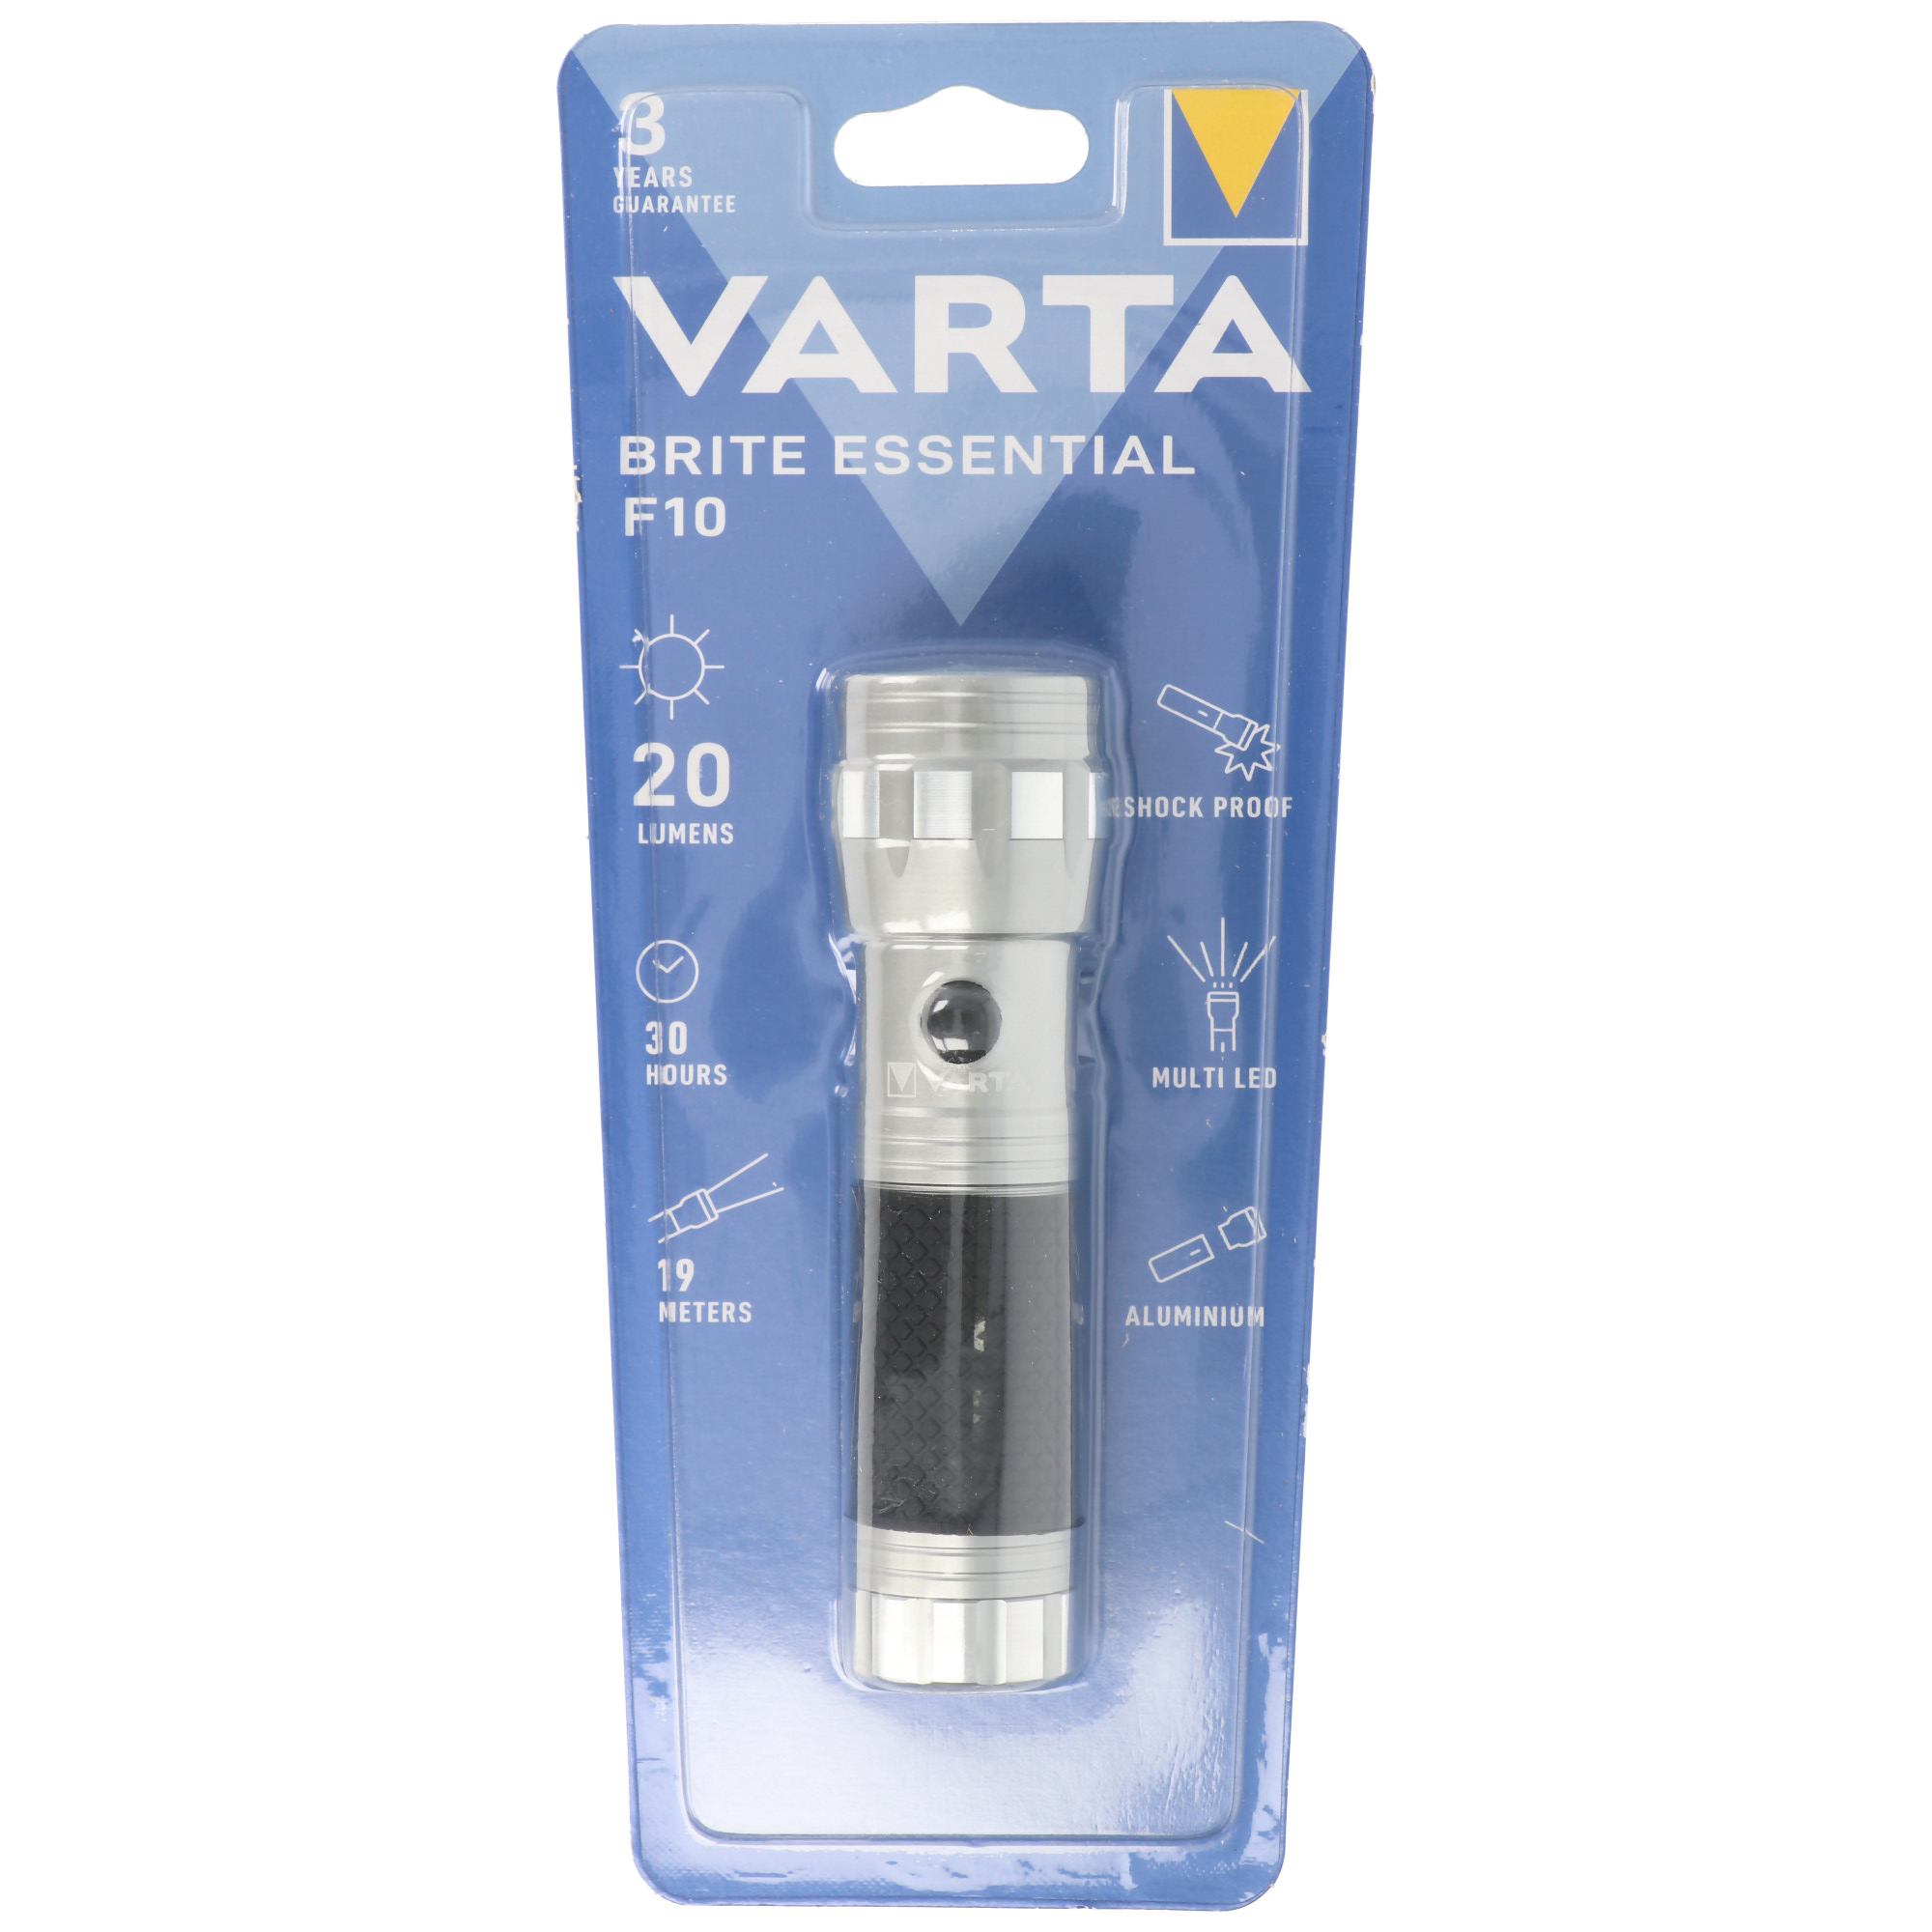 Varta LED Taschenlampe Brite Essential F10 20lm, exkl. 3x Batterie Micro AAA, Retail Blister